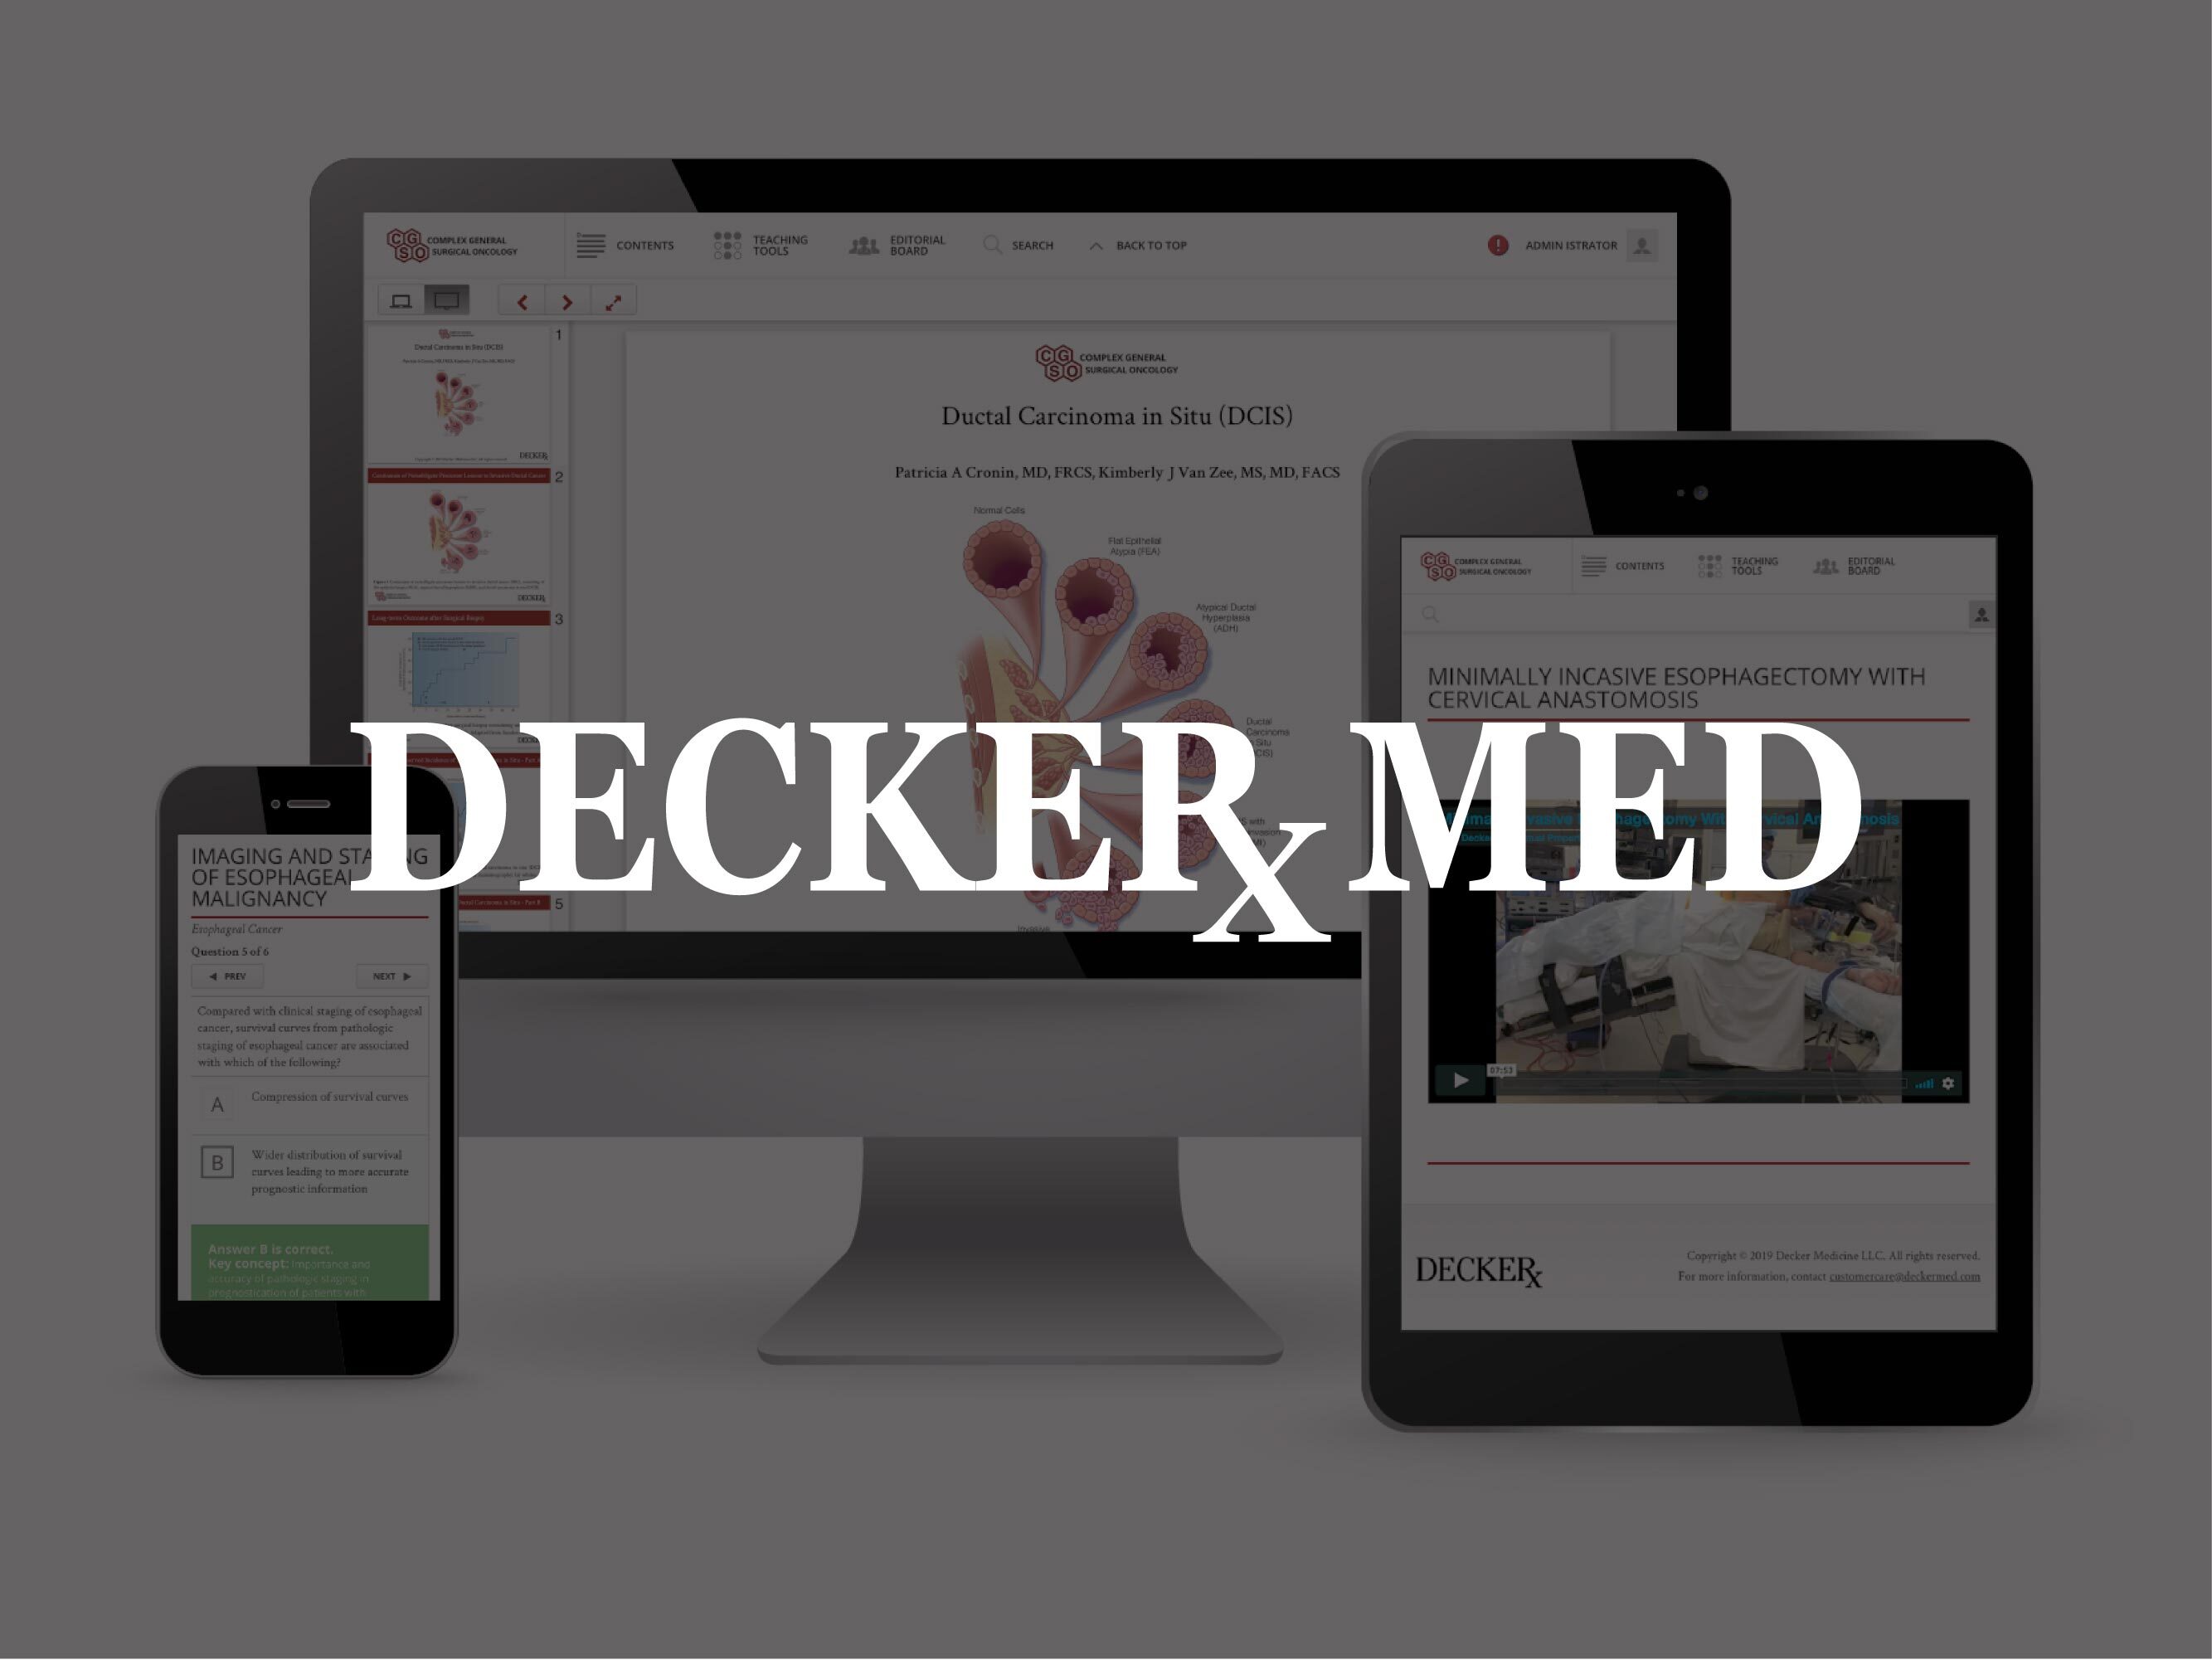 Decker logo, tablet & smartphone with image of product